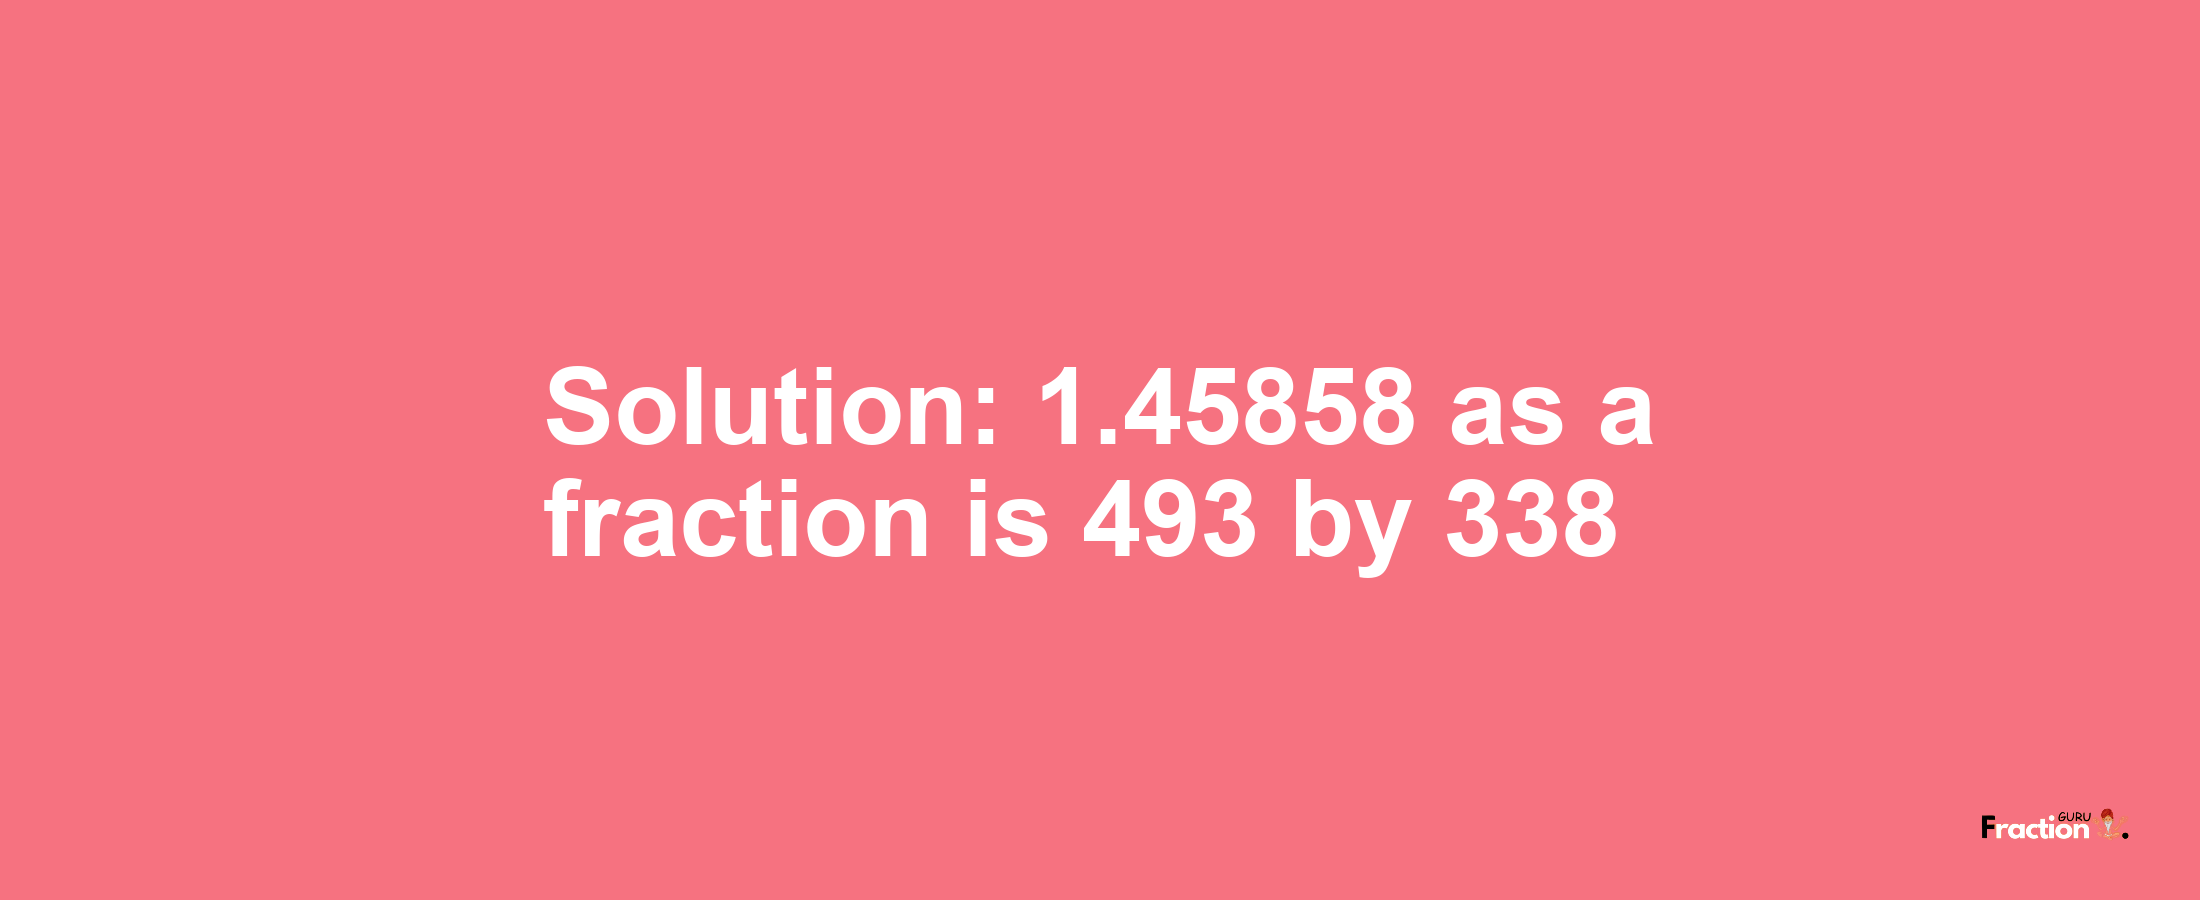 Solution:1.45858 as a fraction is 493/338